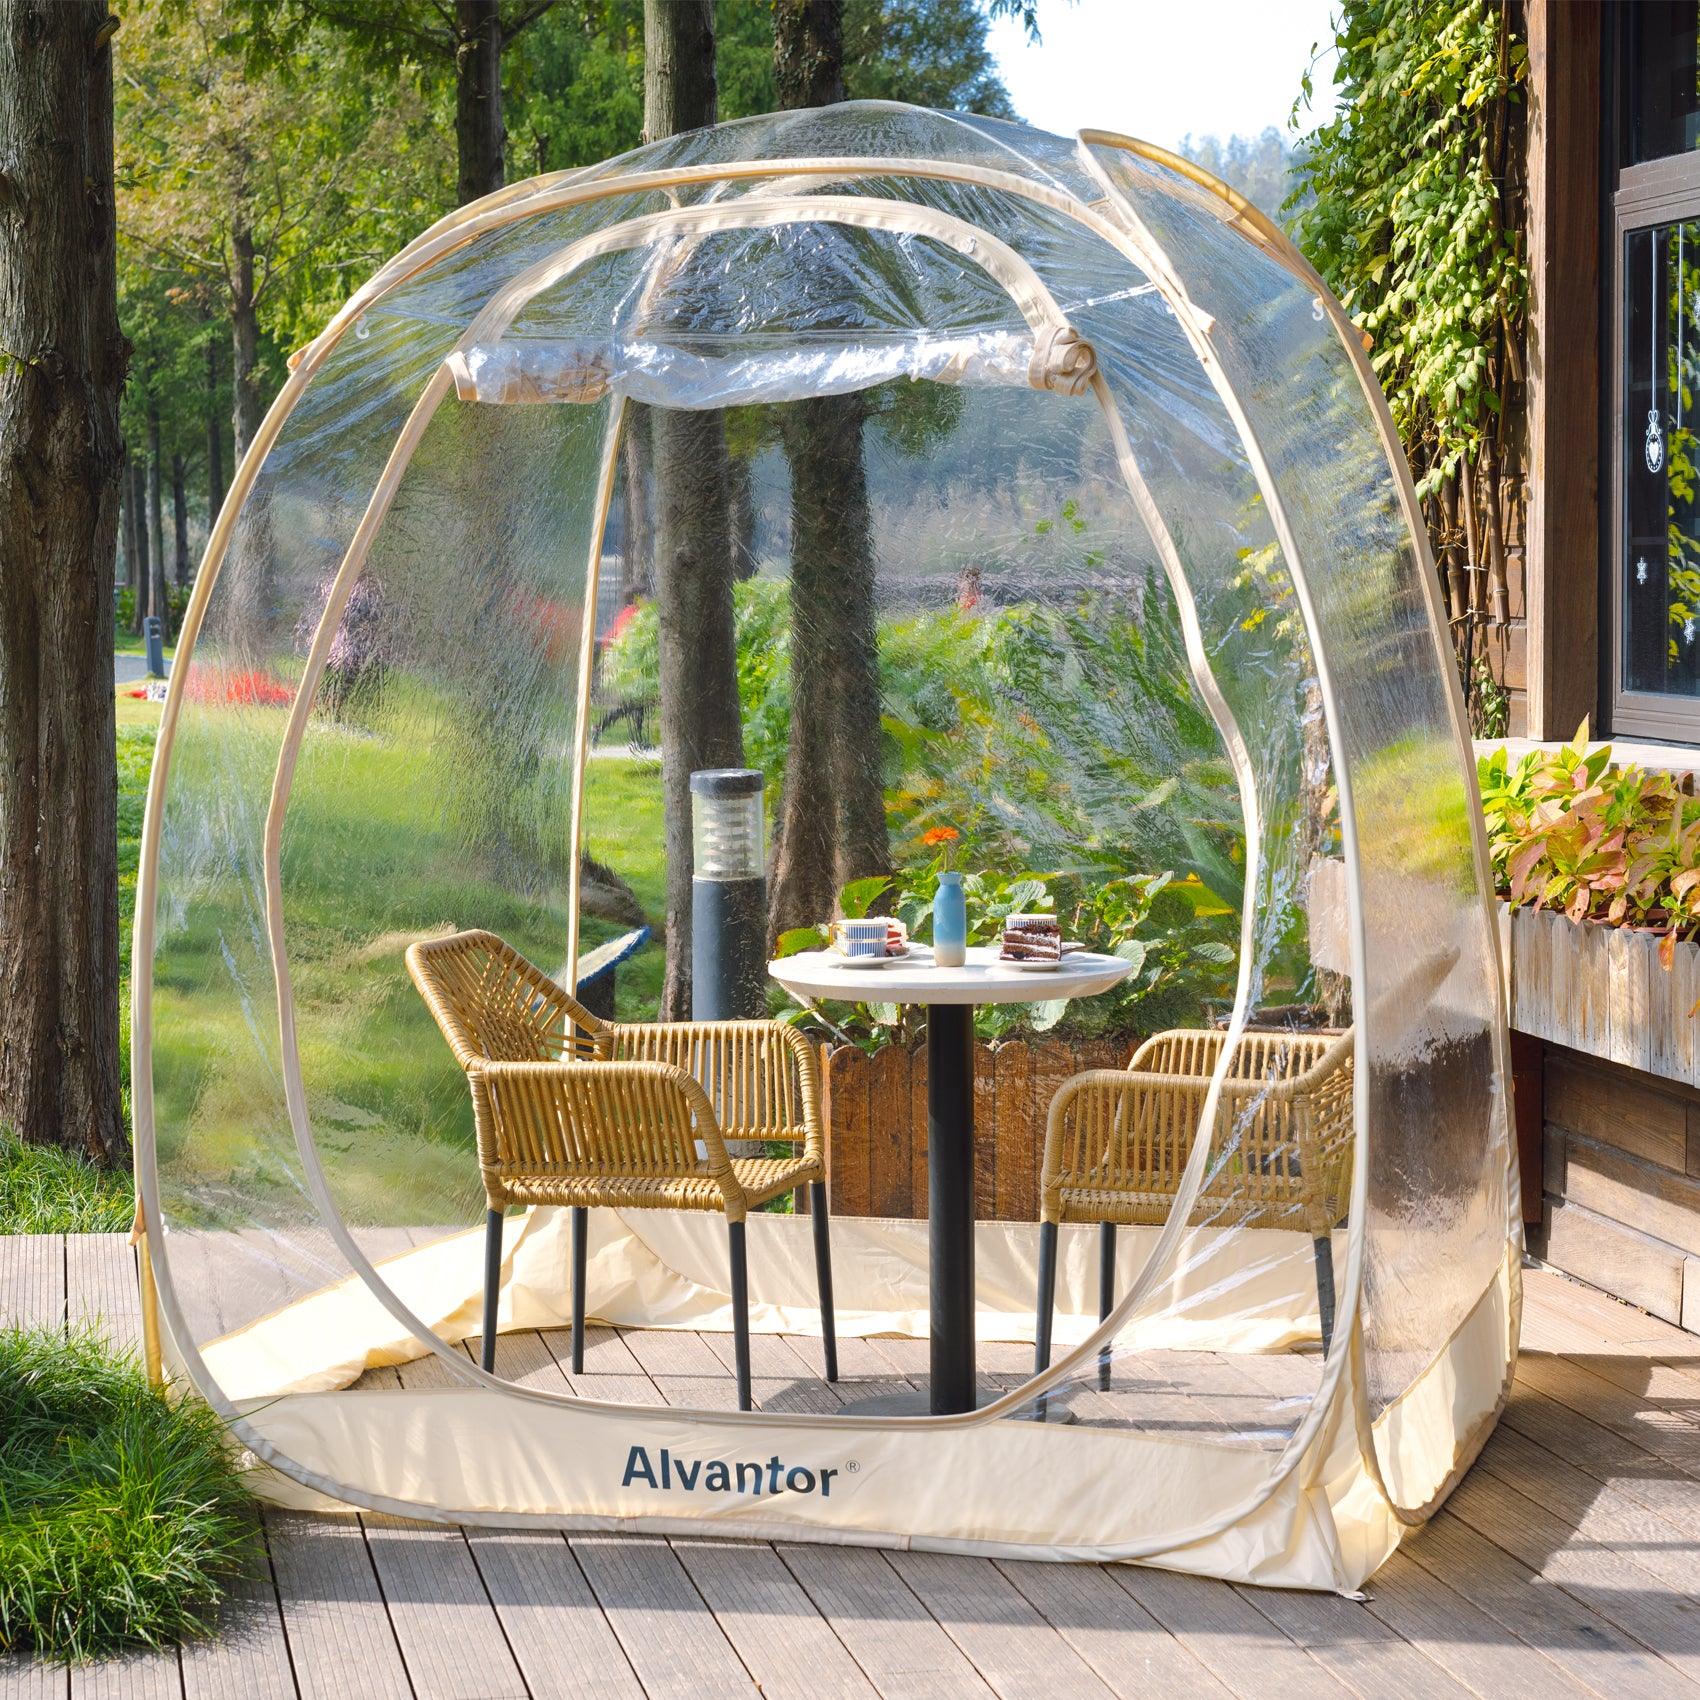 6'x6' bubble tent for outdoor dinning